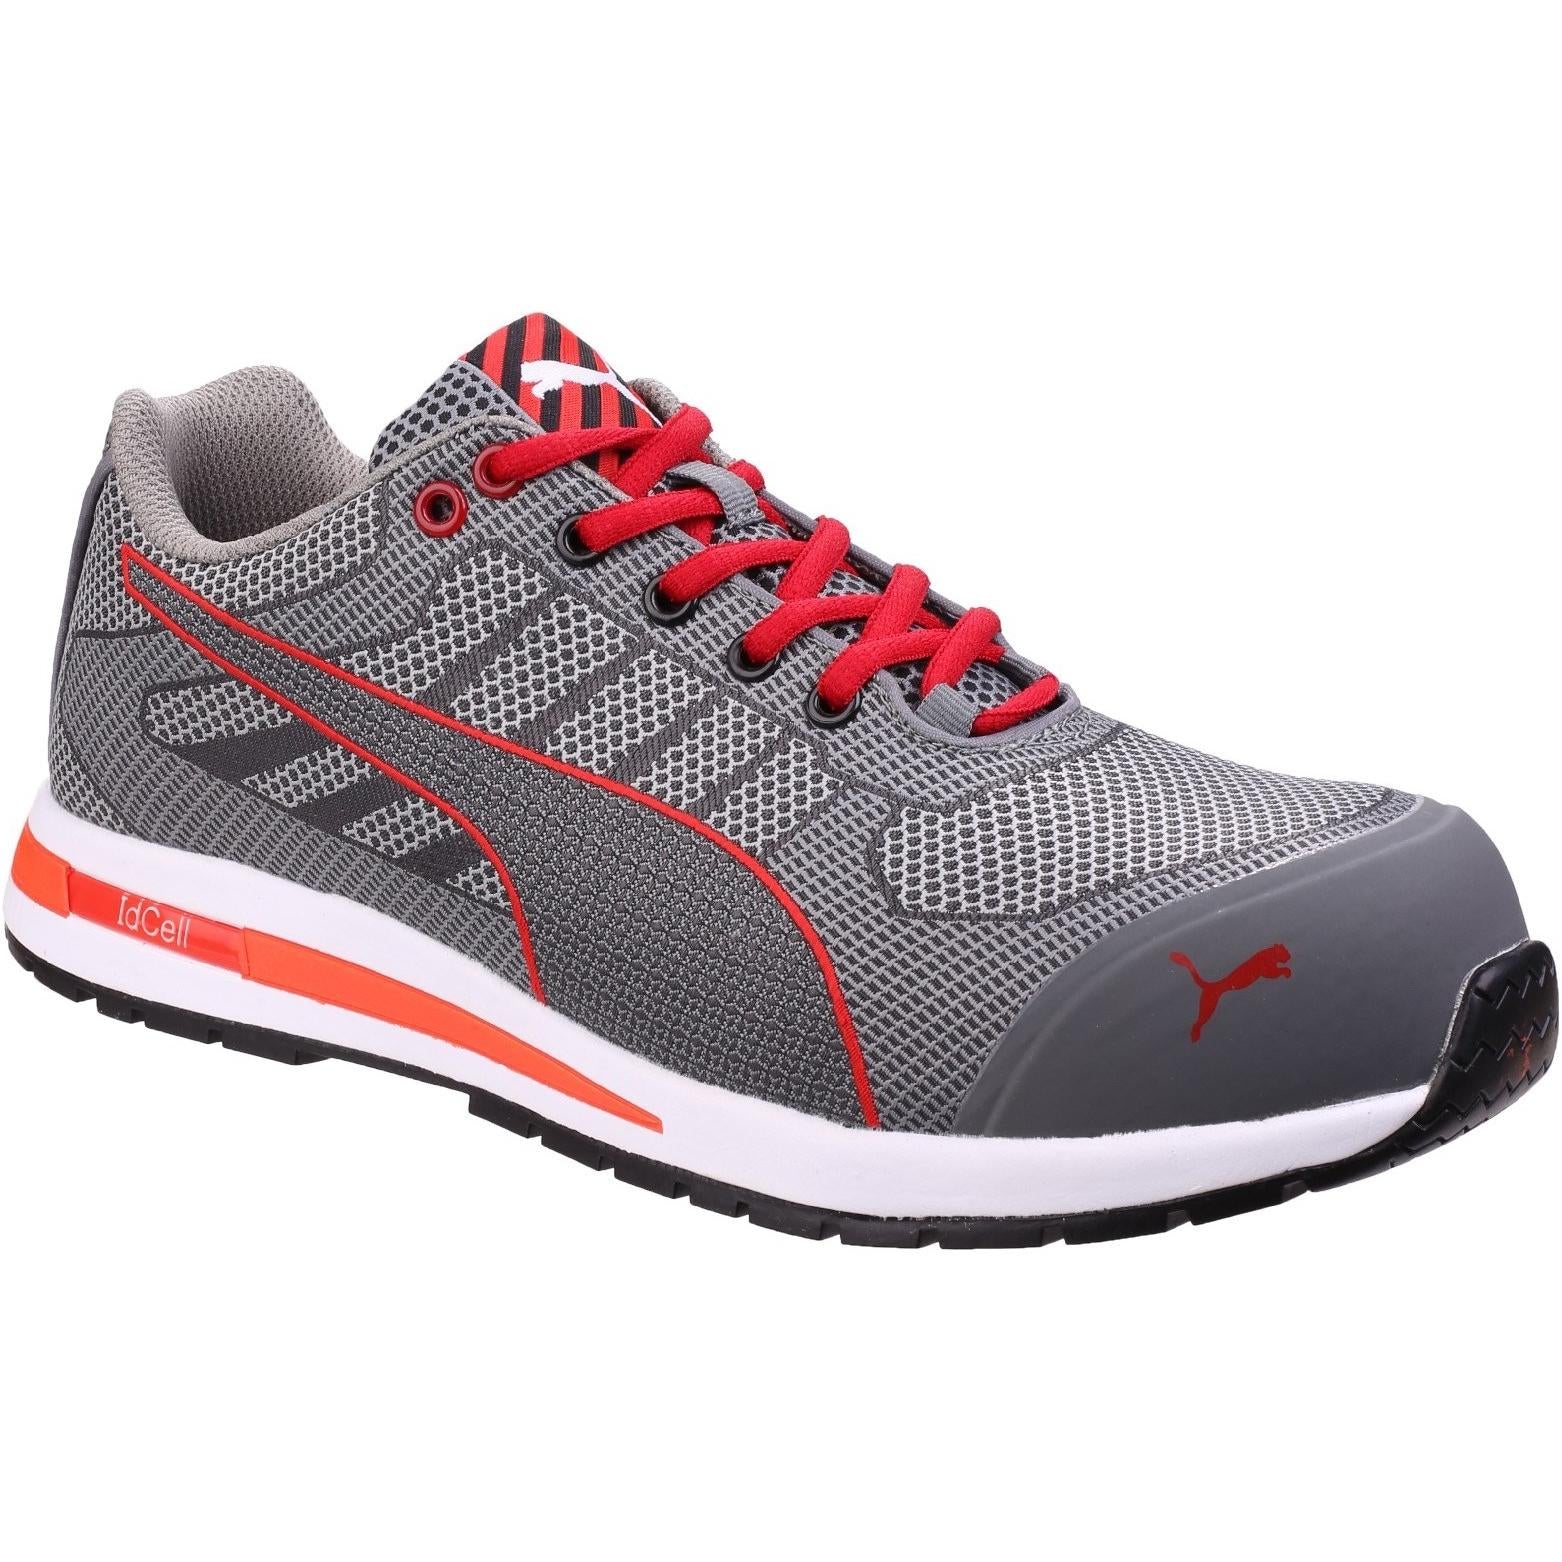 Puma Xelerate Knit Low Safety Trainer